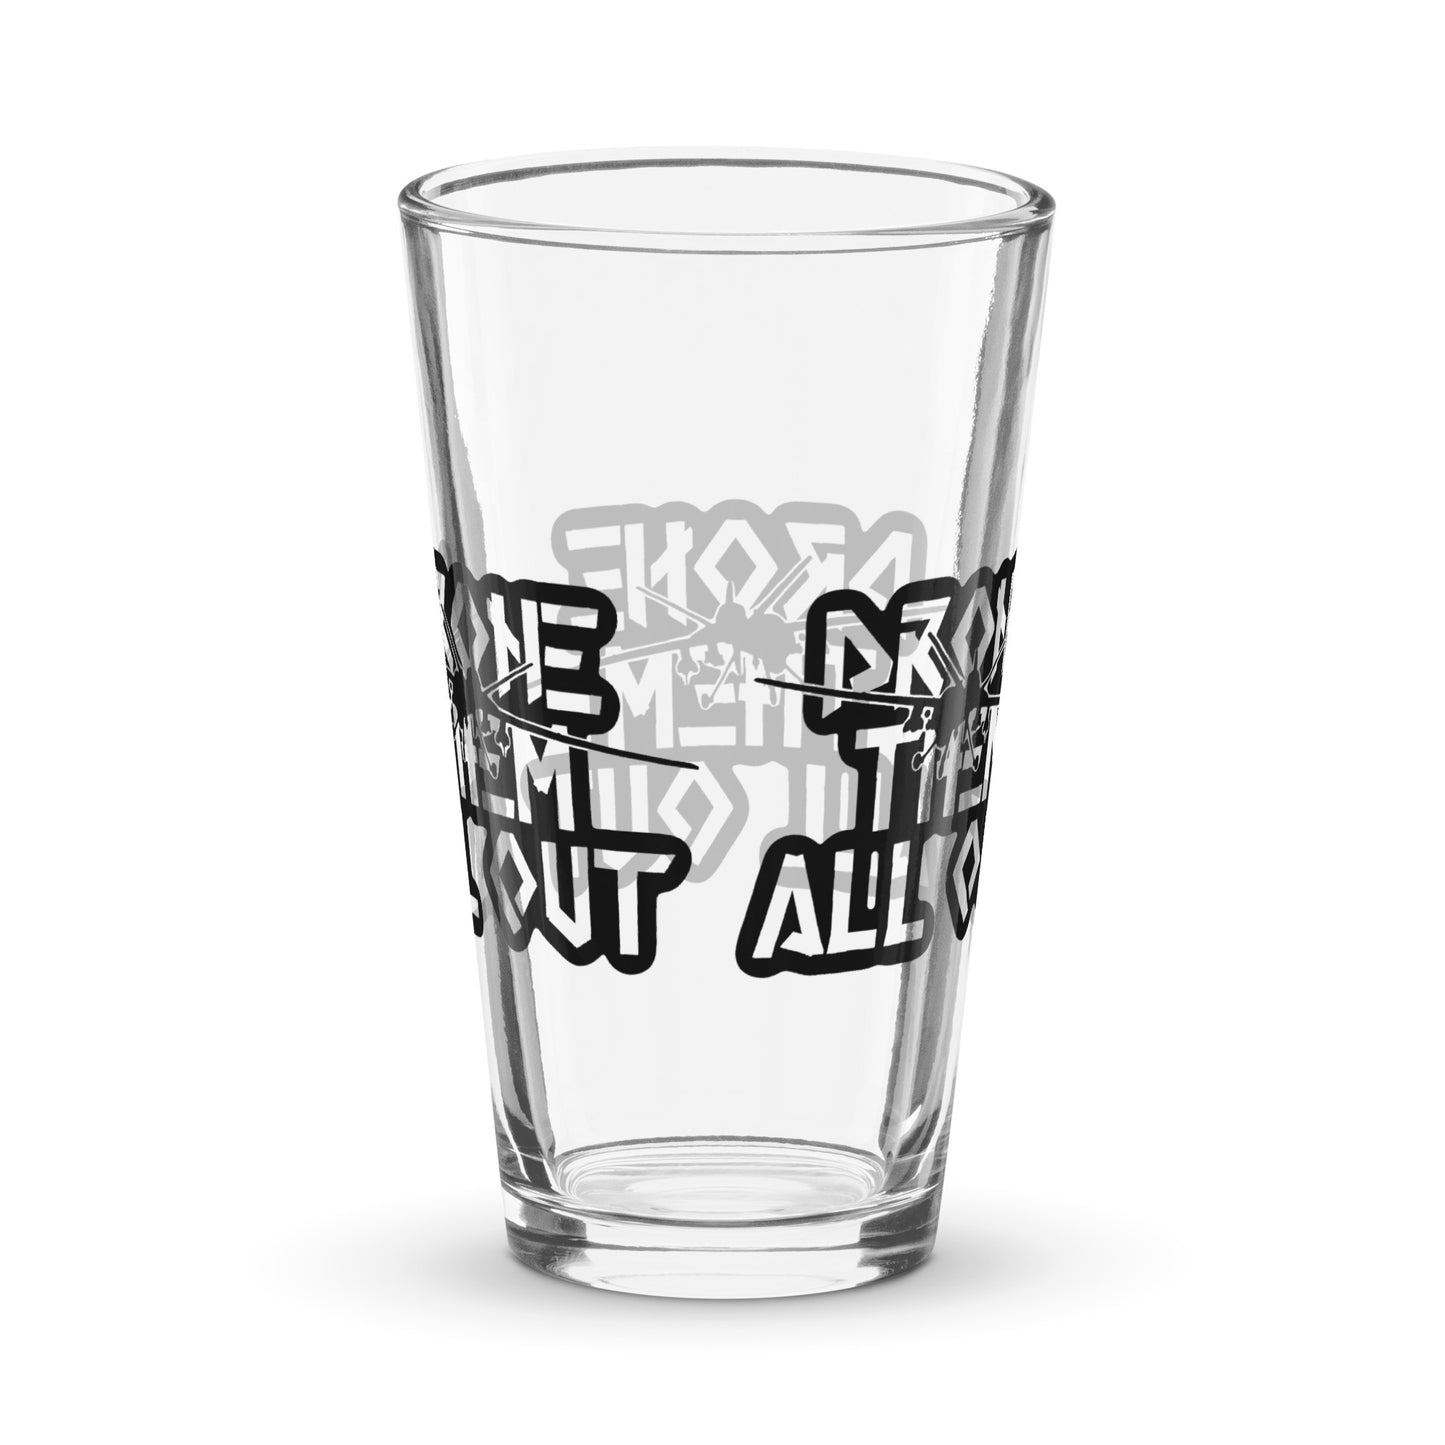 Drone Them Out- Reaper Shaker pint glass